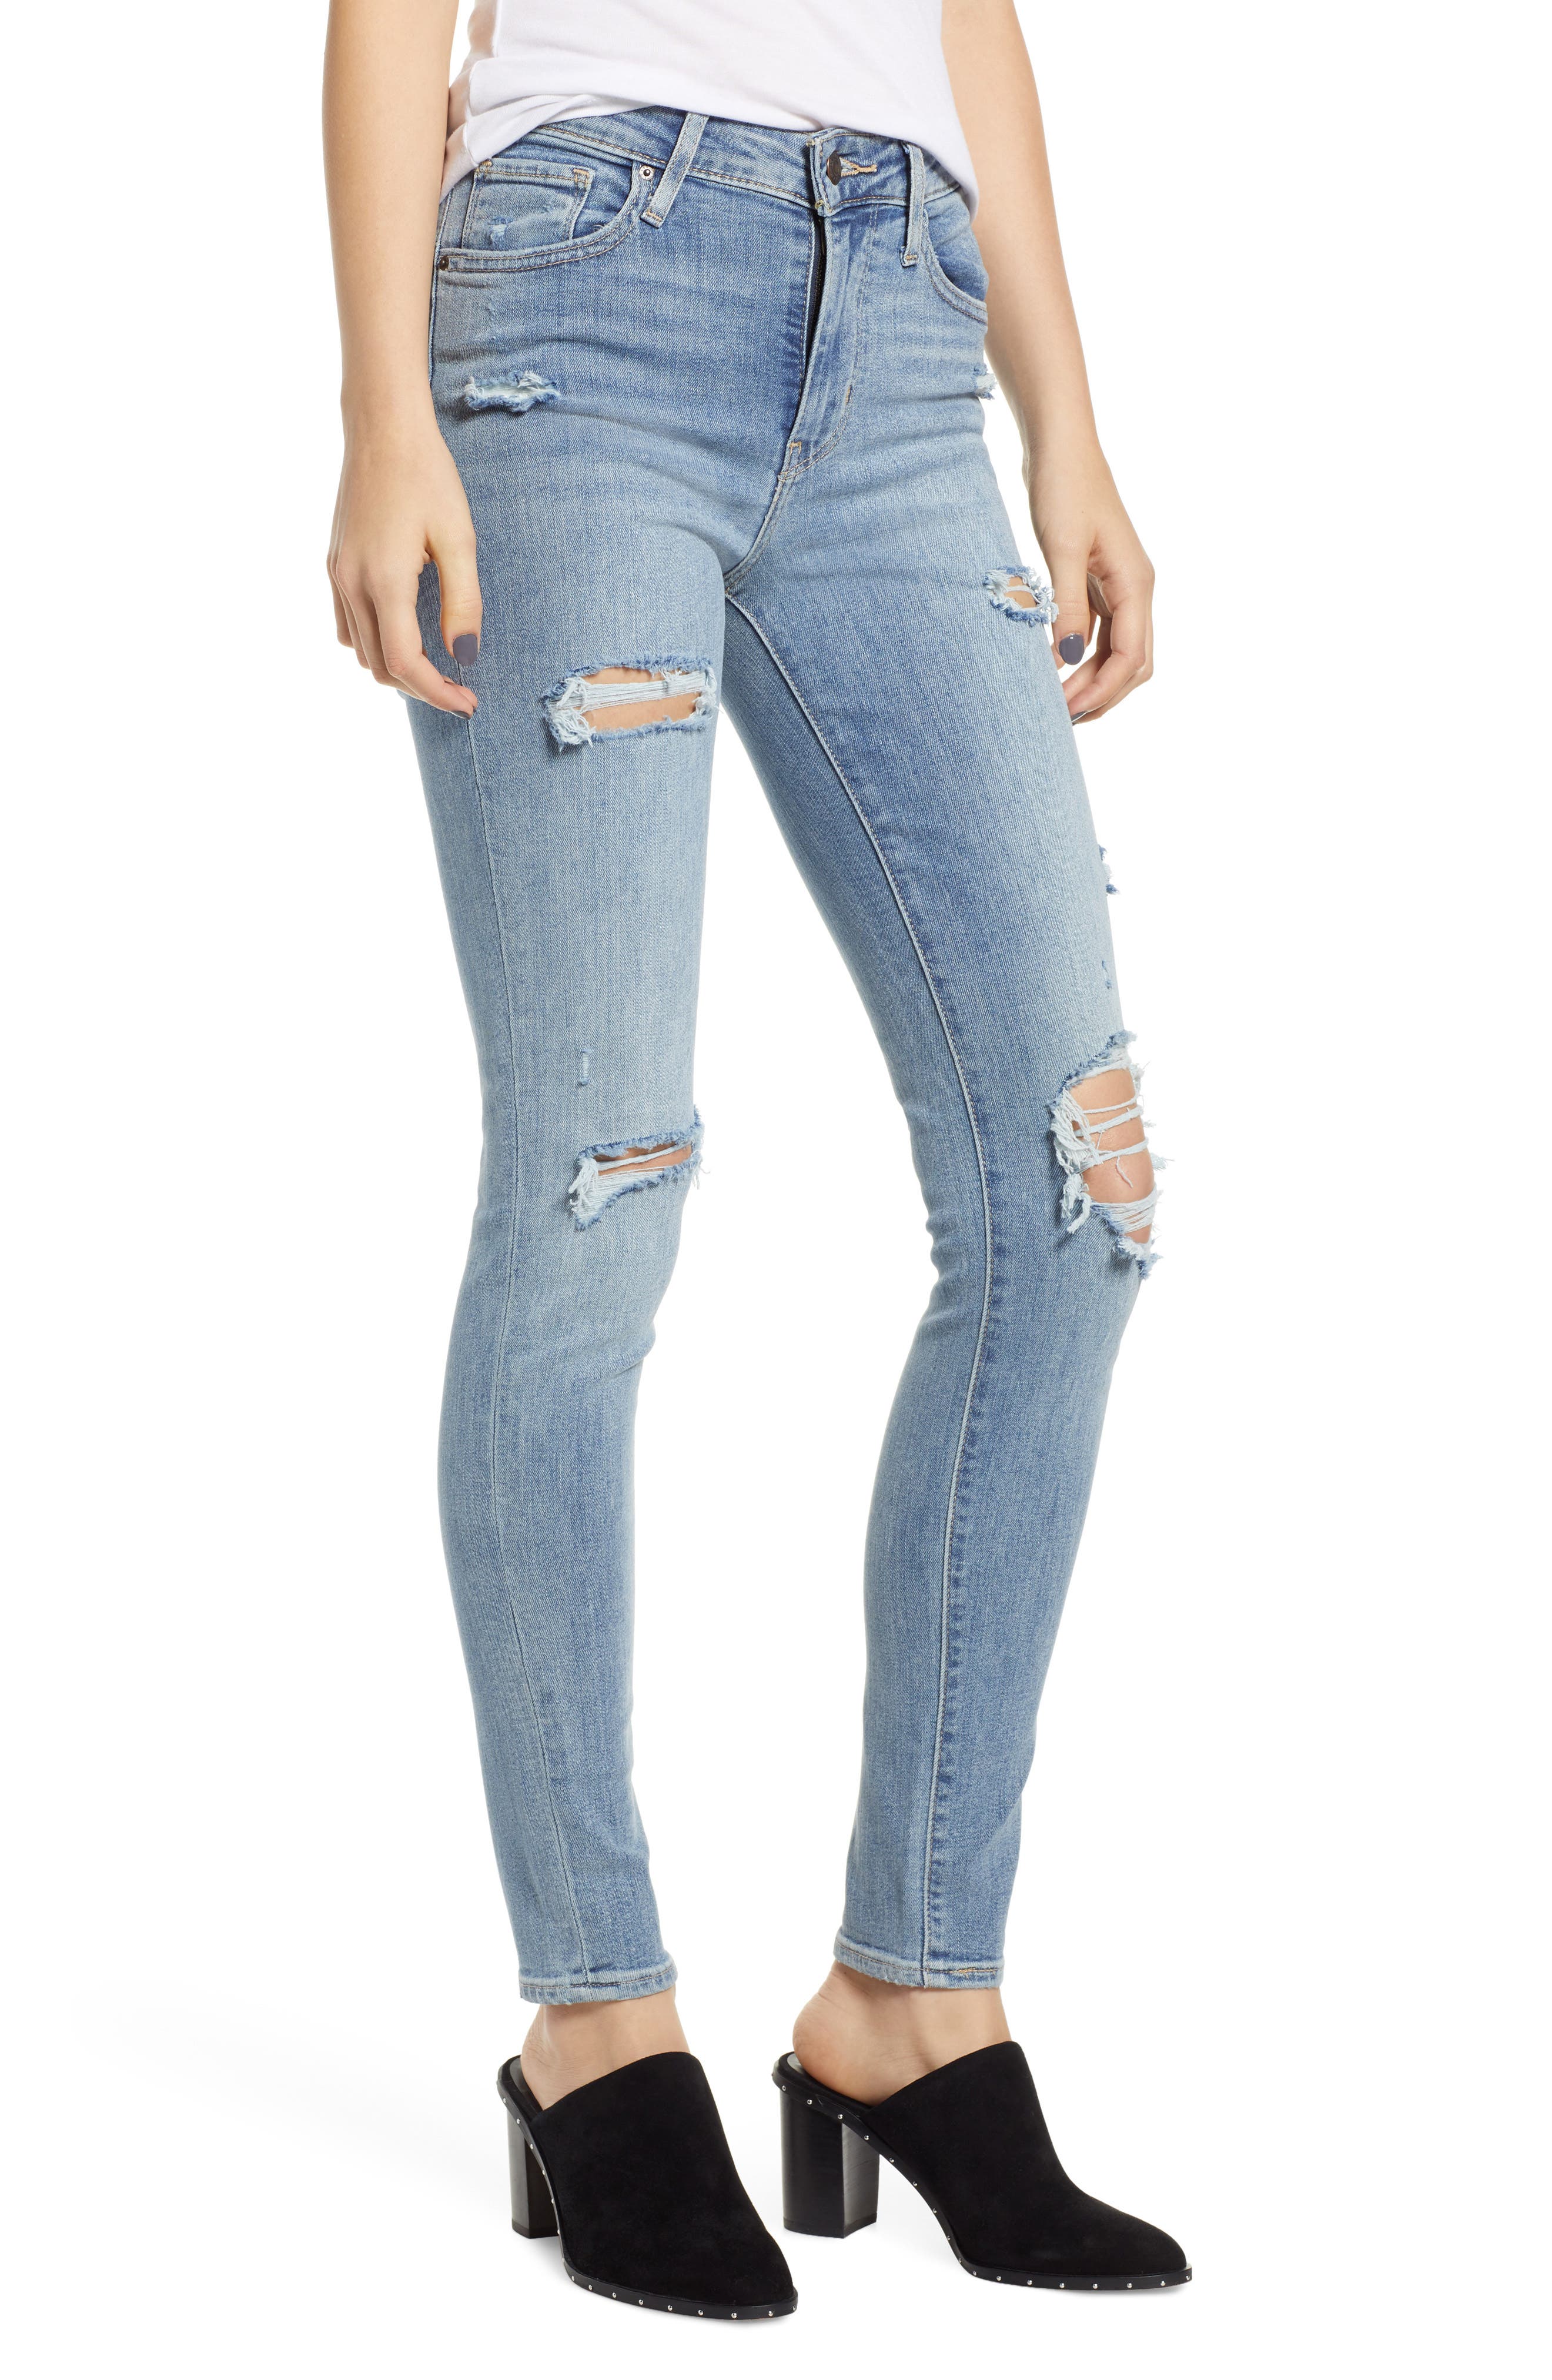 High Waist Skinny Jeans (Say Anything 